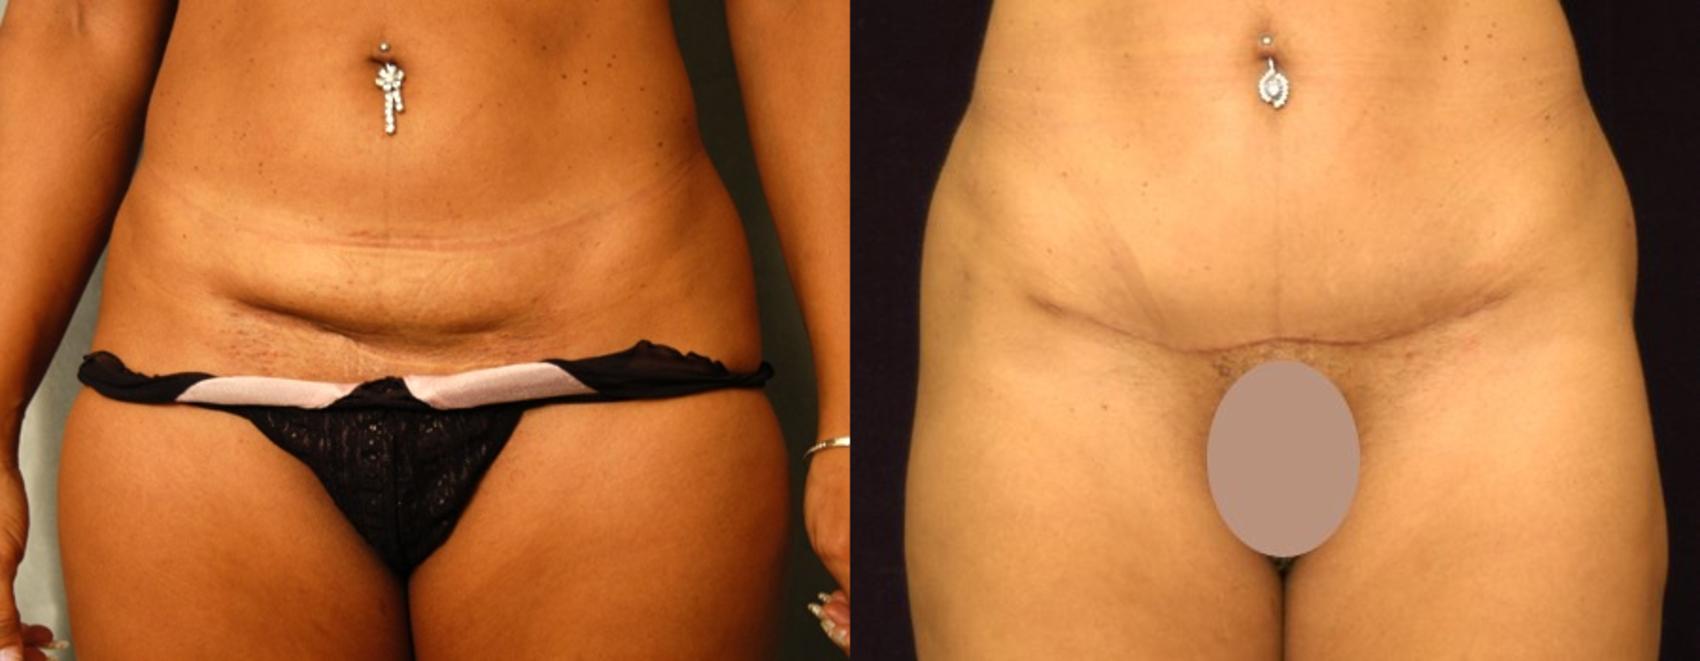 Tummy Tuck in NYC & Manhattan  Board-Certified Plastic Surgeon Dr. Sterry